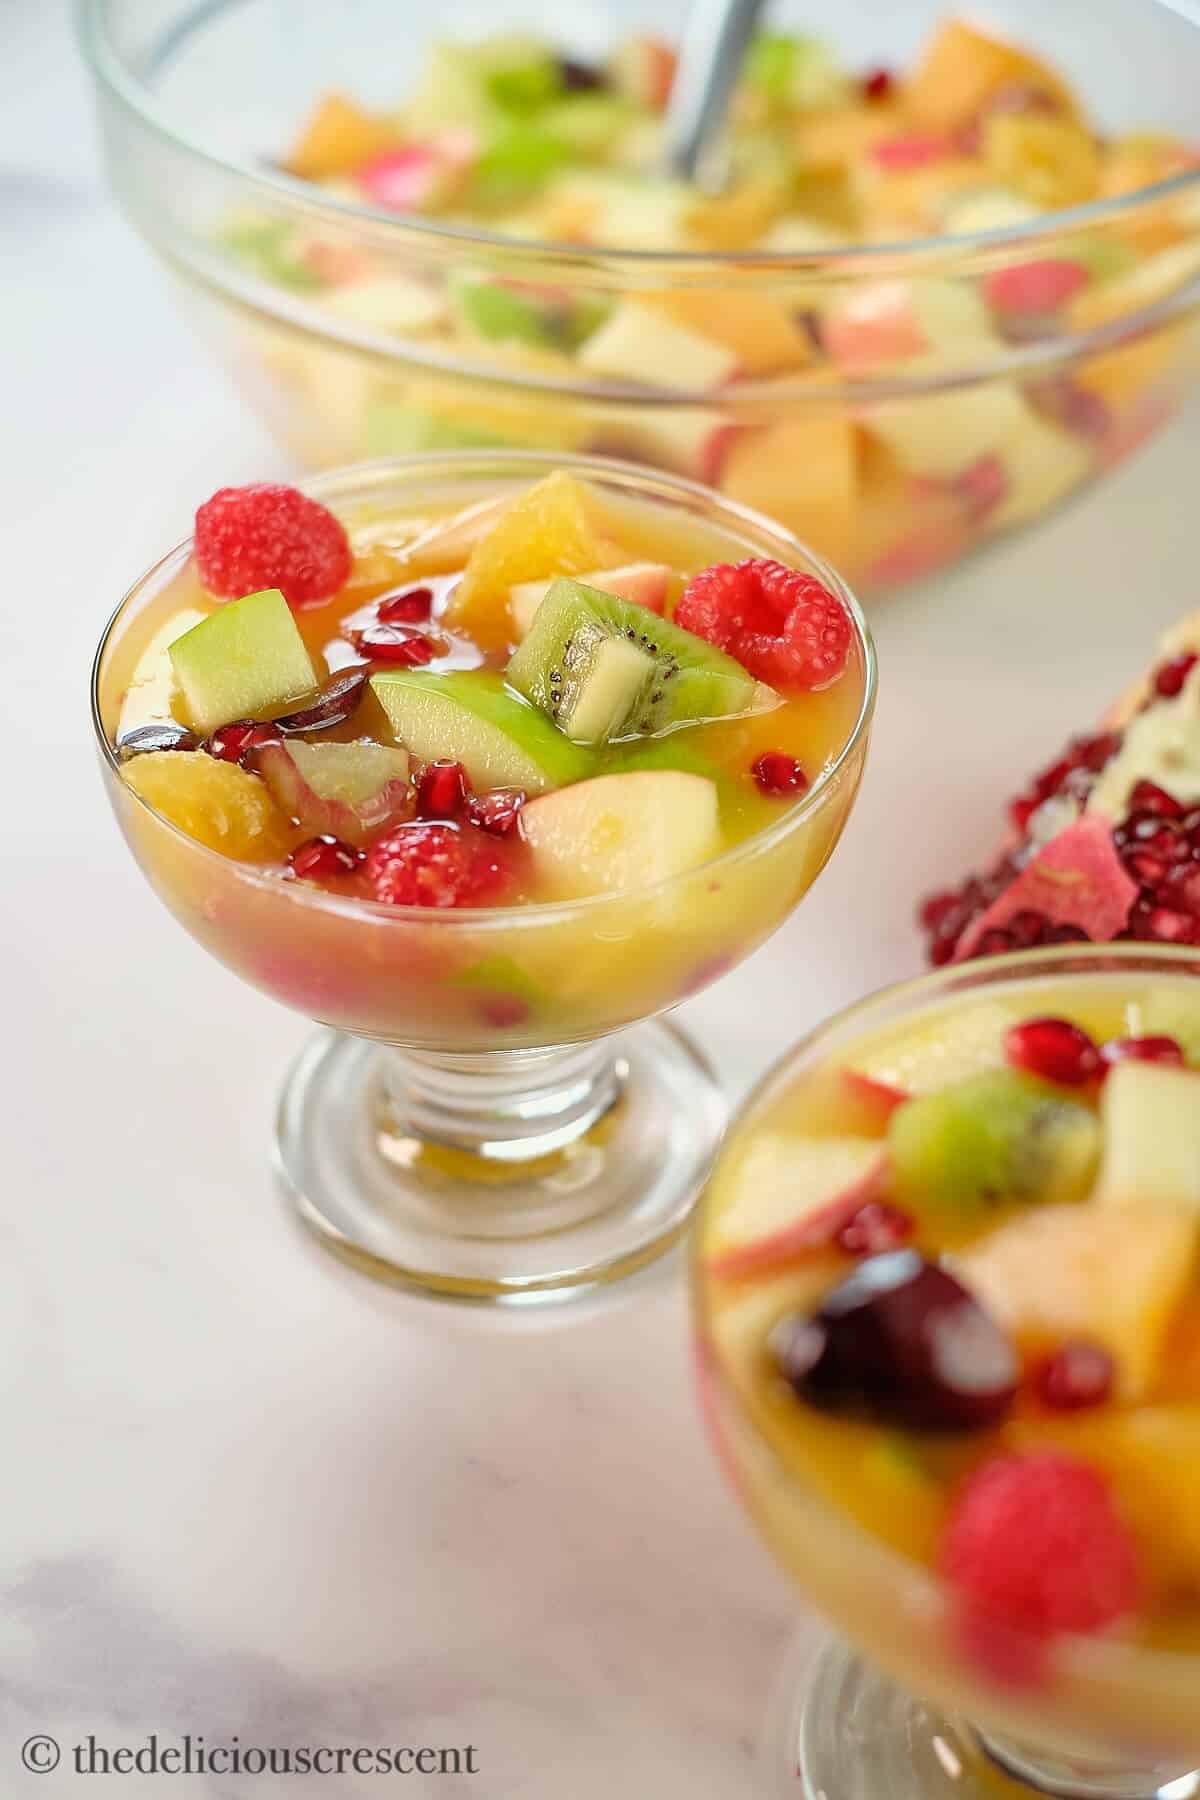 Fruits cut in bite size and served with dressing.